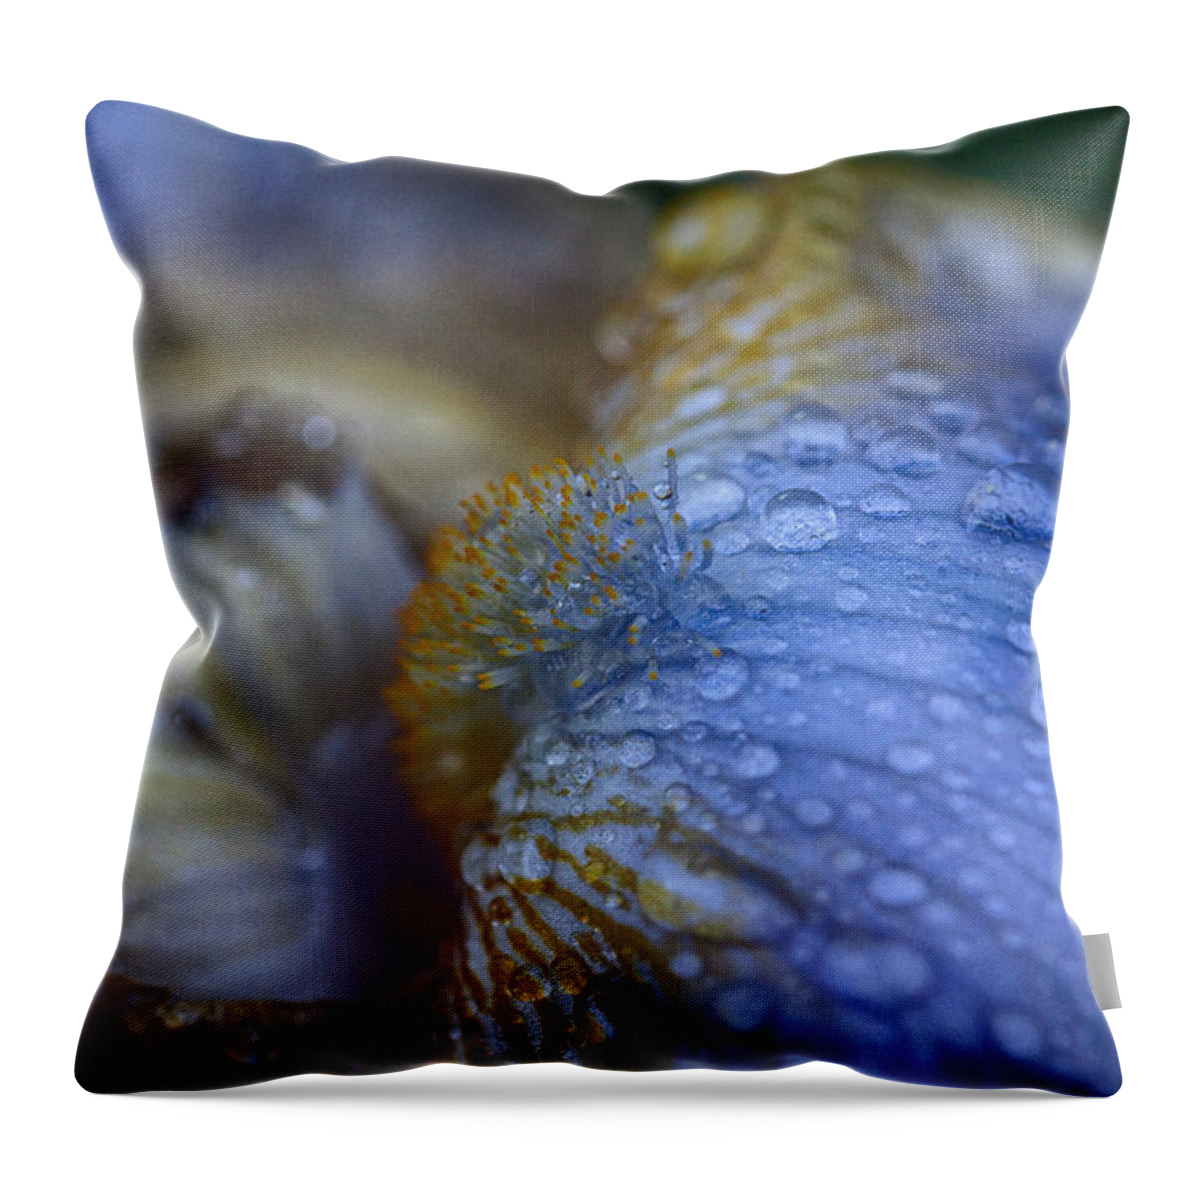 Bearded Iris Throw Pillow featuring the photograph Blue Danube by Jeff Folger